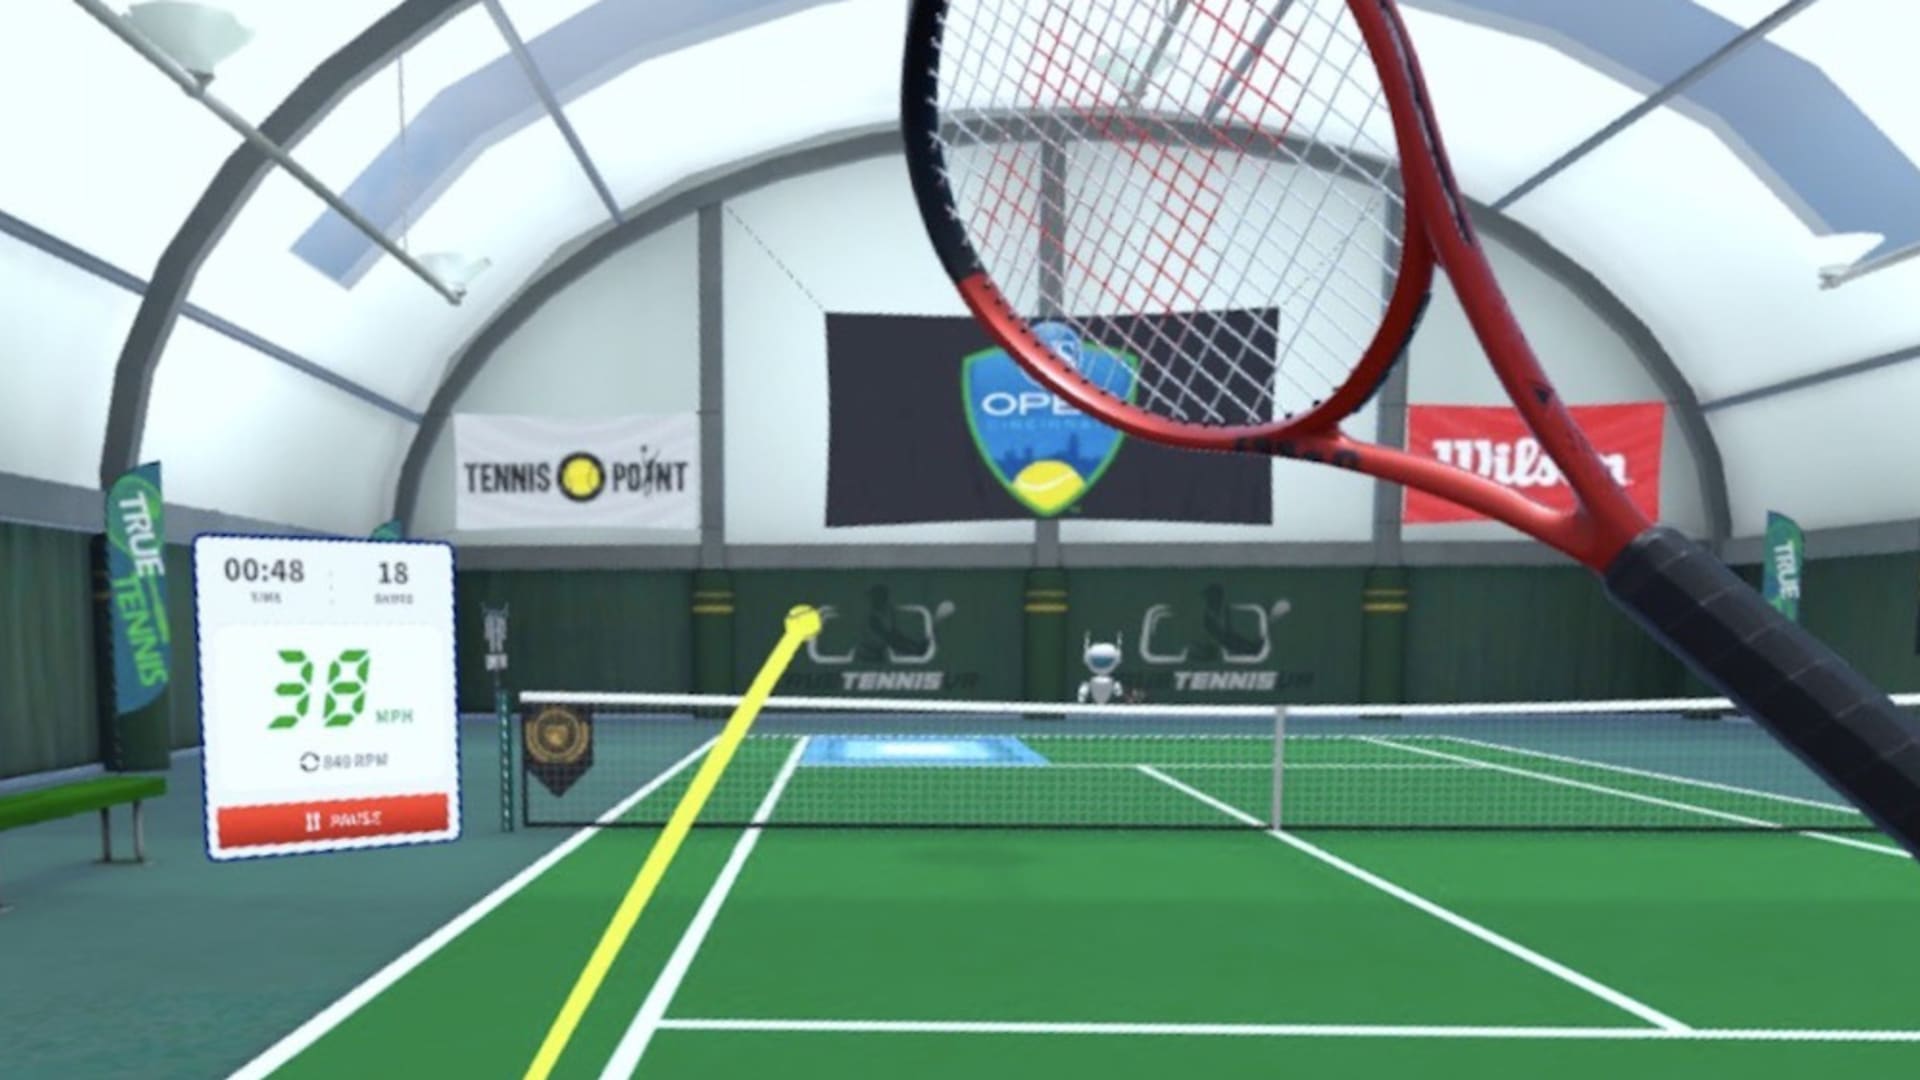 Virtual Assistant TrueTennisVR is a state-of-the-art tennis simulation that recreates the hitting experience